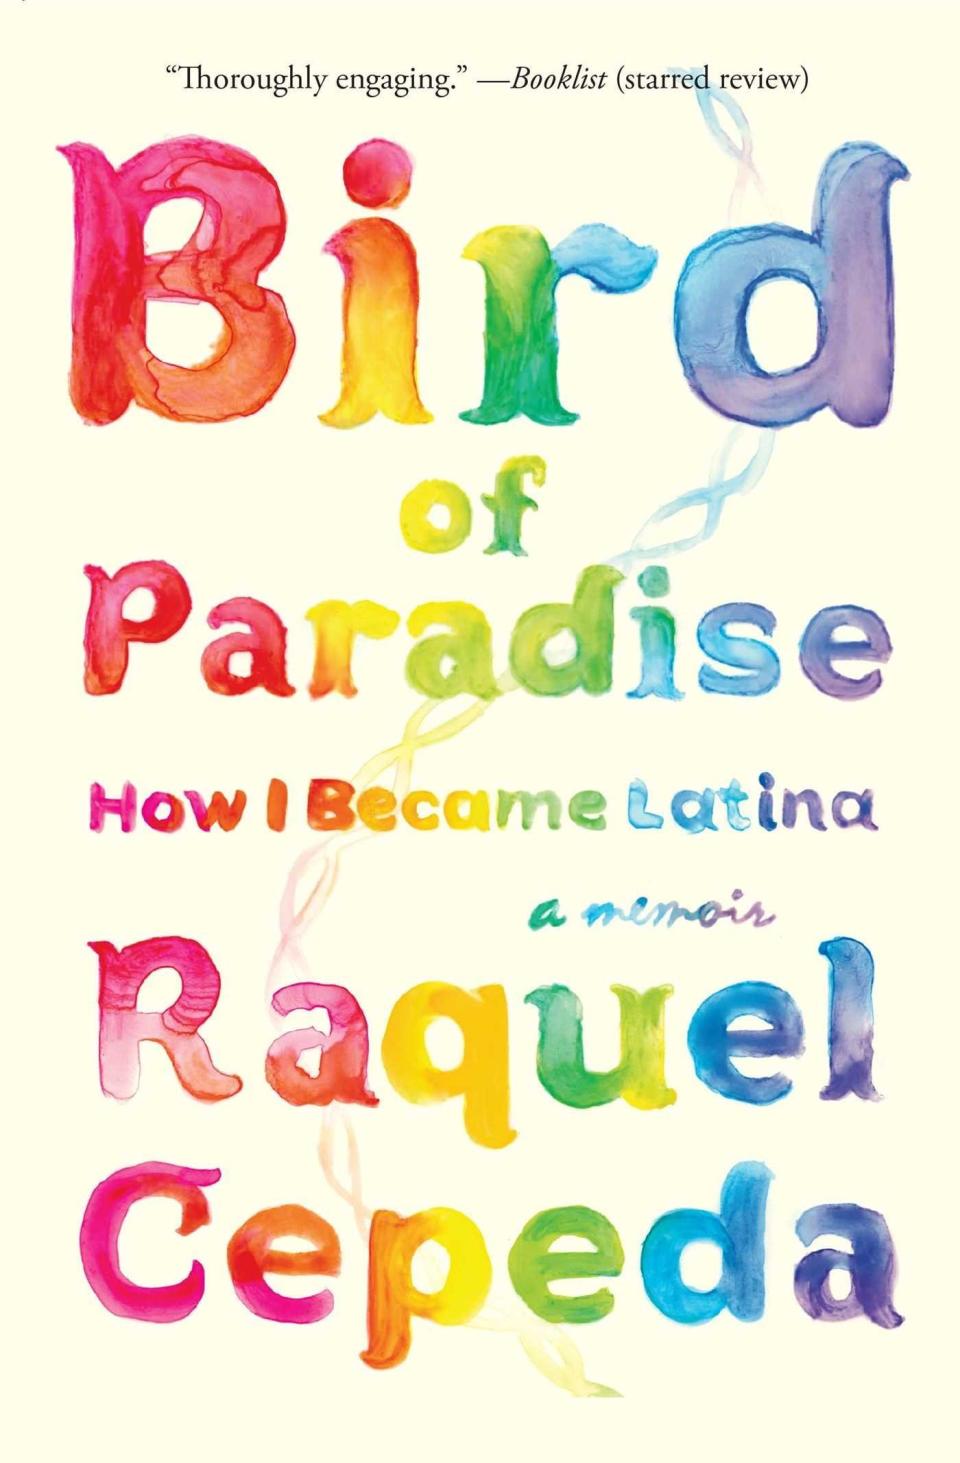 "<i>Bird of Paradise</i> is [Cepeda's]&nbsp;story of redemption, of a her search to understand her identity in a society that told her over and over again that she did not matter ...&nbsp;As a memoir, it is not simply a story of herself, but of Latina women growing up in New York City (and the Dominican Republic) in the 1970s and 1980s. It is a story of migration and stagnation, love and sorrow. It is a story of blackness and whiteness; it is a tale of borderlands and isolation, race and ethnicity, struggle and perseverance." --&nbsp;<a href="http://www.huffingtonpost.com/dr-david-j-leonard/remixing-science-raquel-c_b_2811090.html" data-beacon="{&quot;p&quot;:{&quot;lnid&quot;:&quot;Dr. David J. Leanord, The Huffington Post&quot;,&quot;mpid&quot;:16,&quot;plid&quot;:&quot;http://www.huffingtonpost.com/dr-david-j-leonard/remixing-science-raquel-c_b_2811090.html&quot;}}" data-beacon-parsed="true">Dr. David J. Leanord, The Huffington Post</a>